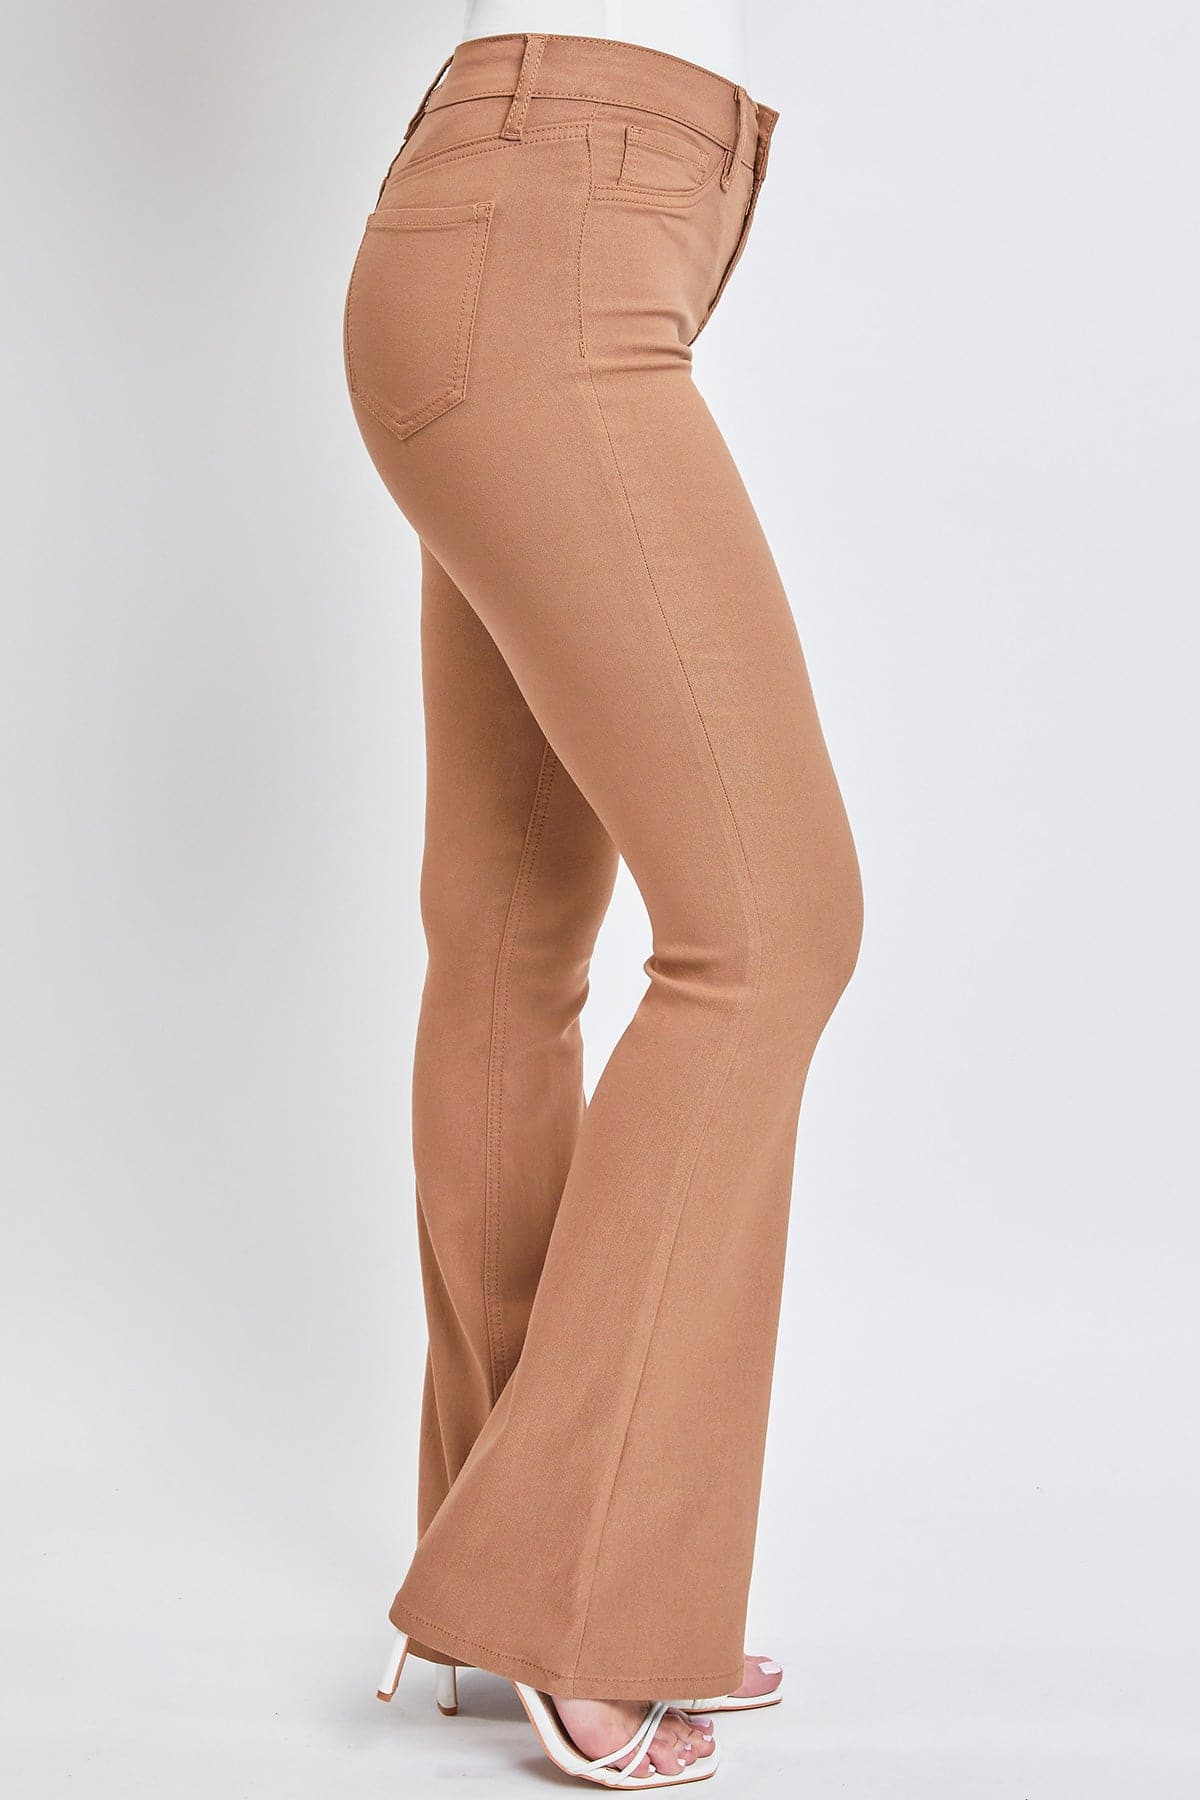 Women's Hyperstretch Forever Color Flare Pants